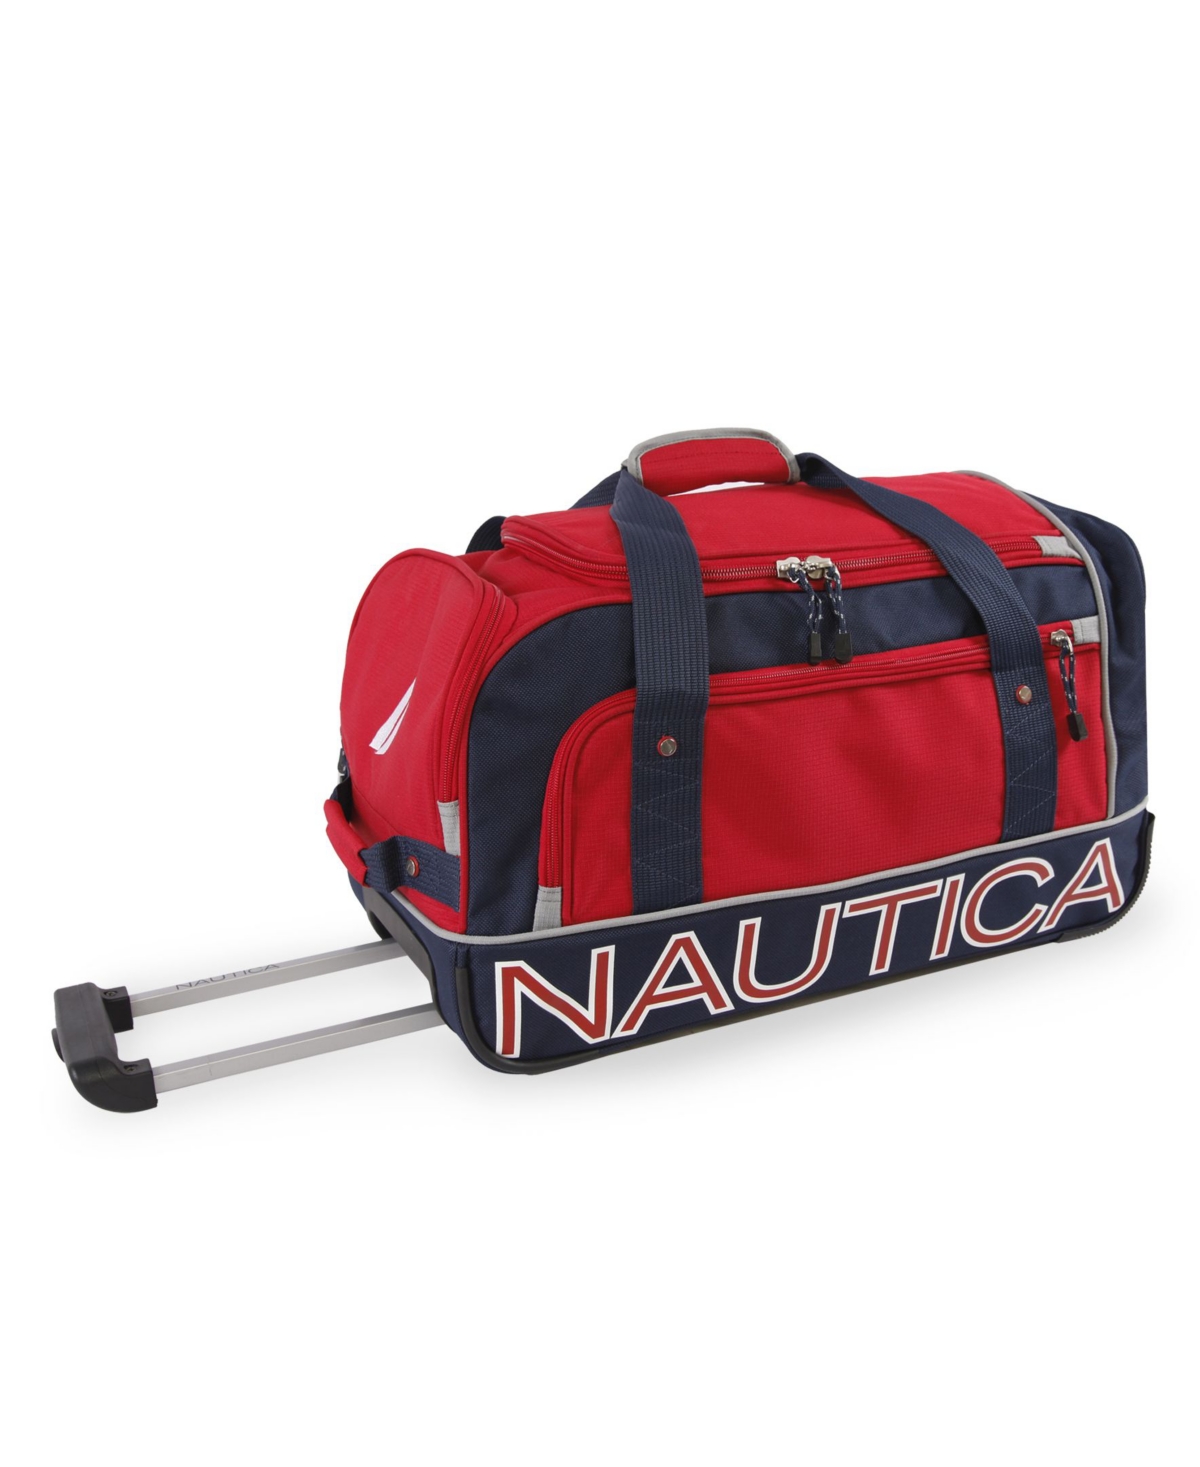 Submariner 22" Rolling Duffel - Red, Navy